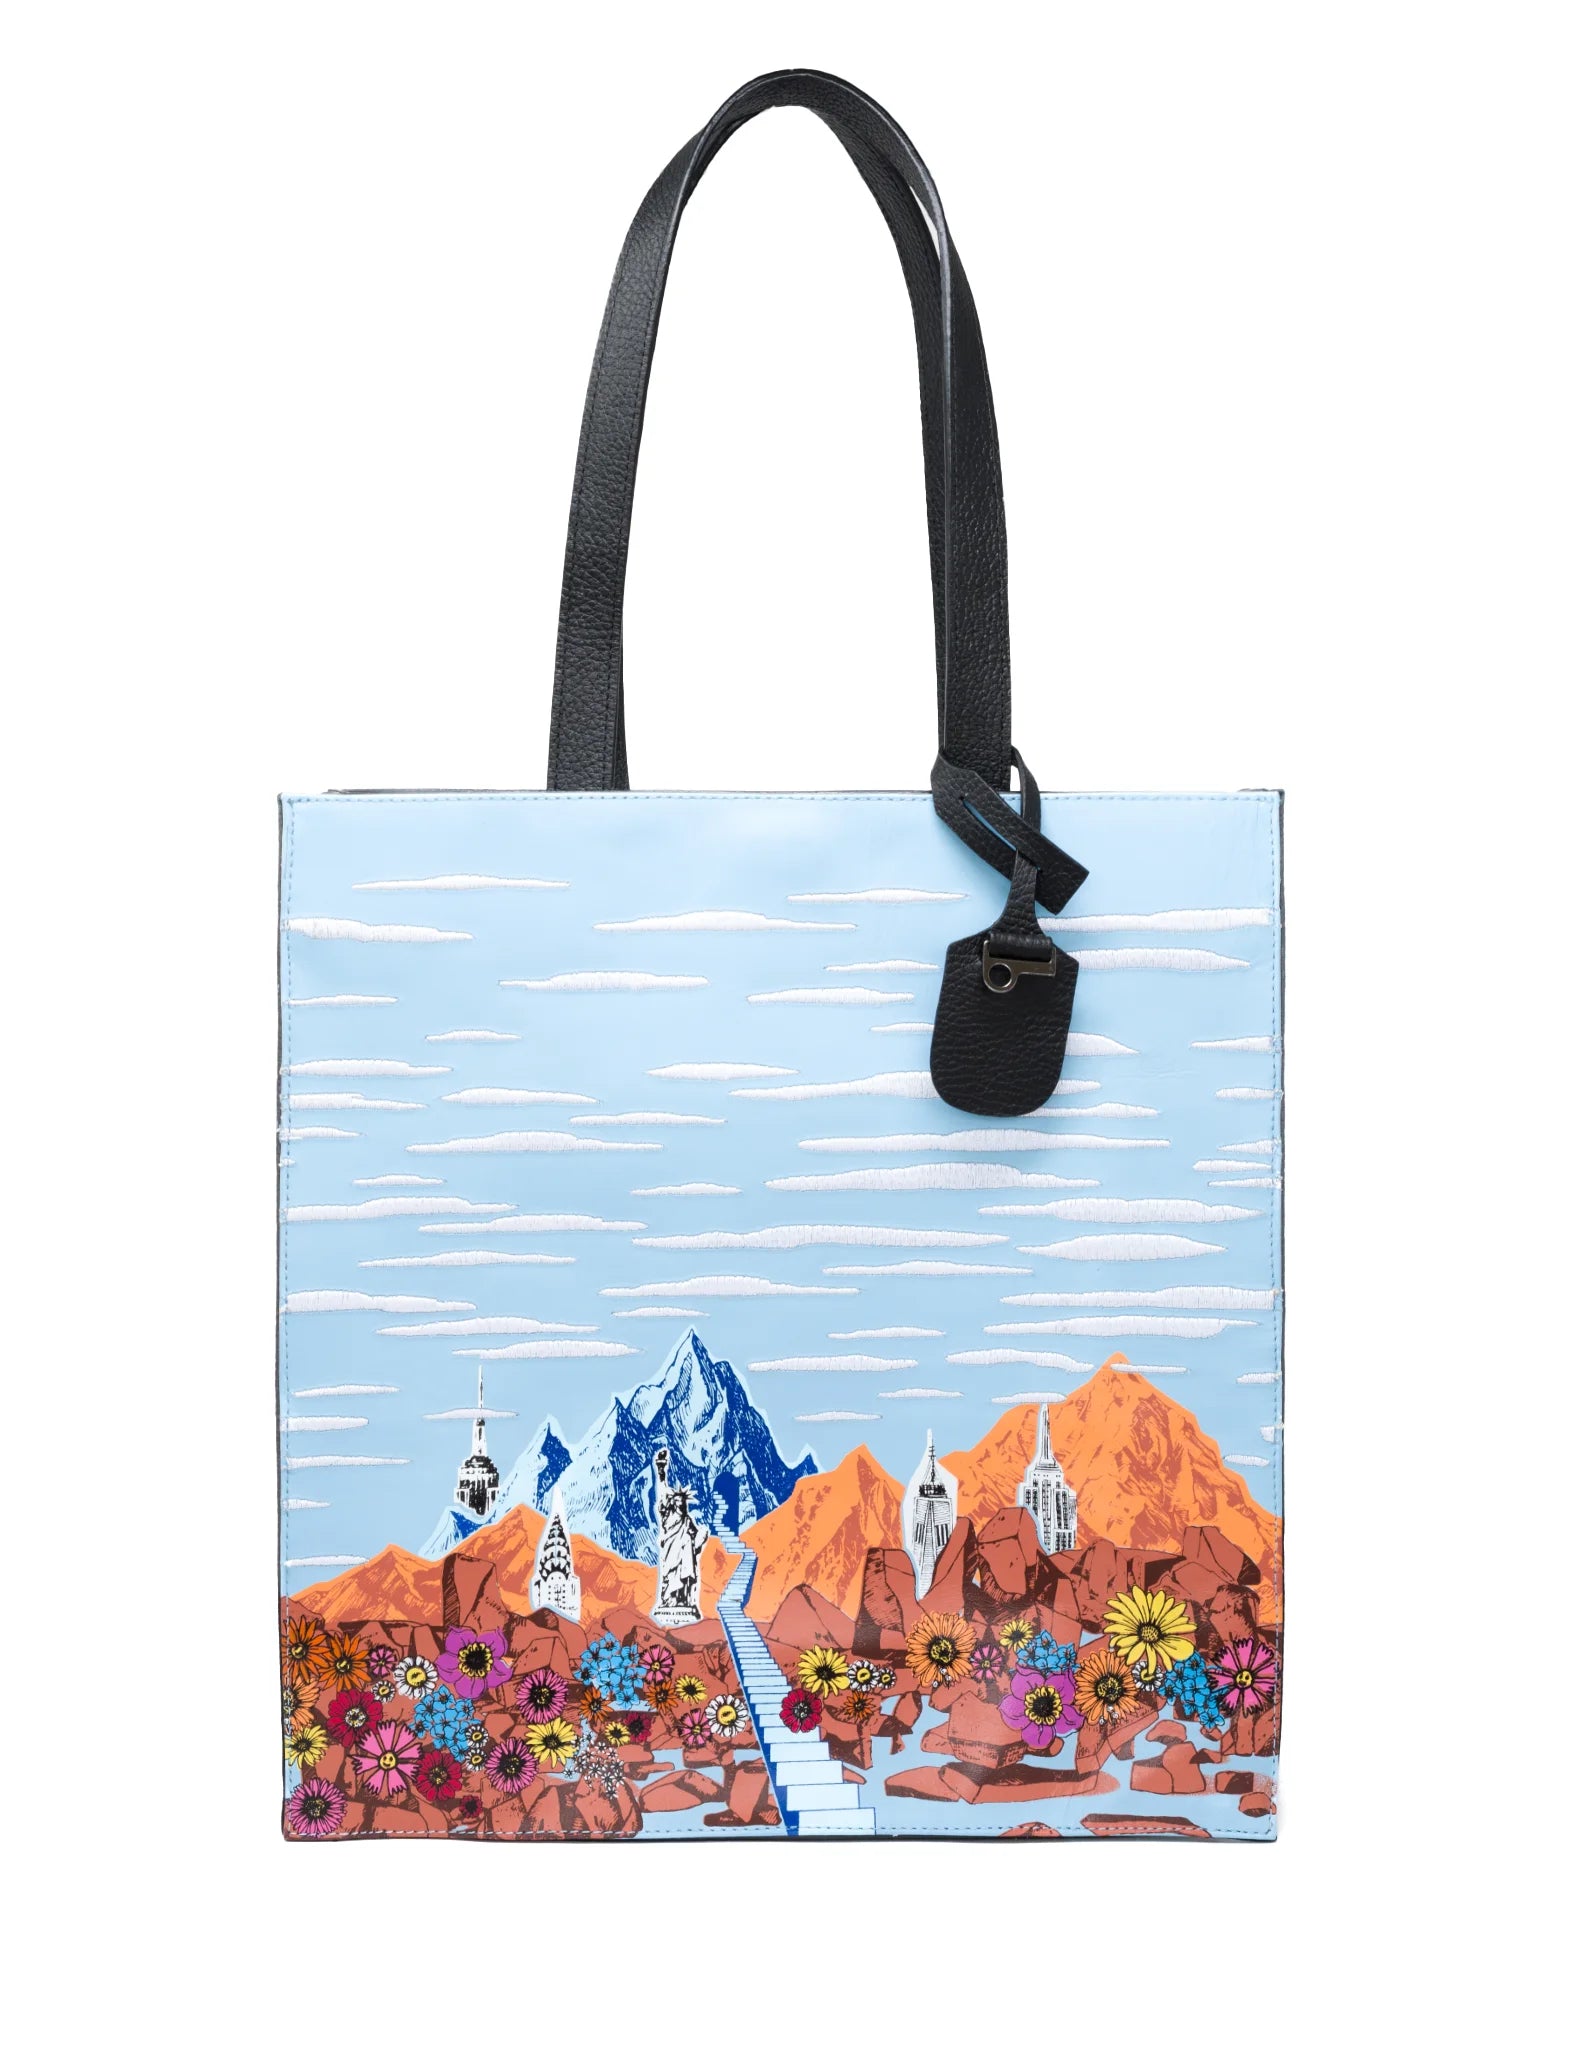 Blue Leather Tote Bag - Mountains, Flowers and Clouds Design - Front